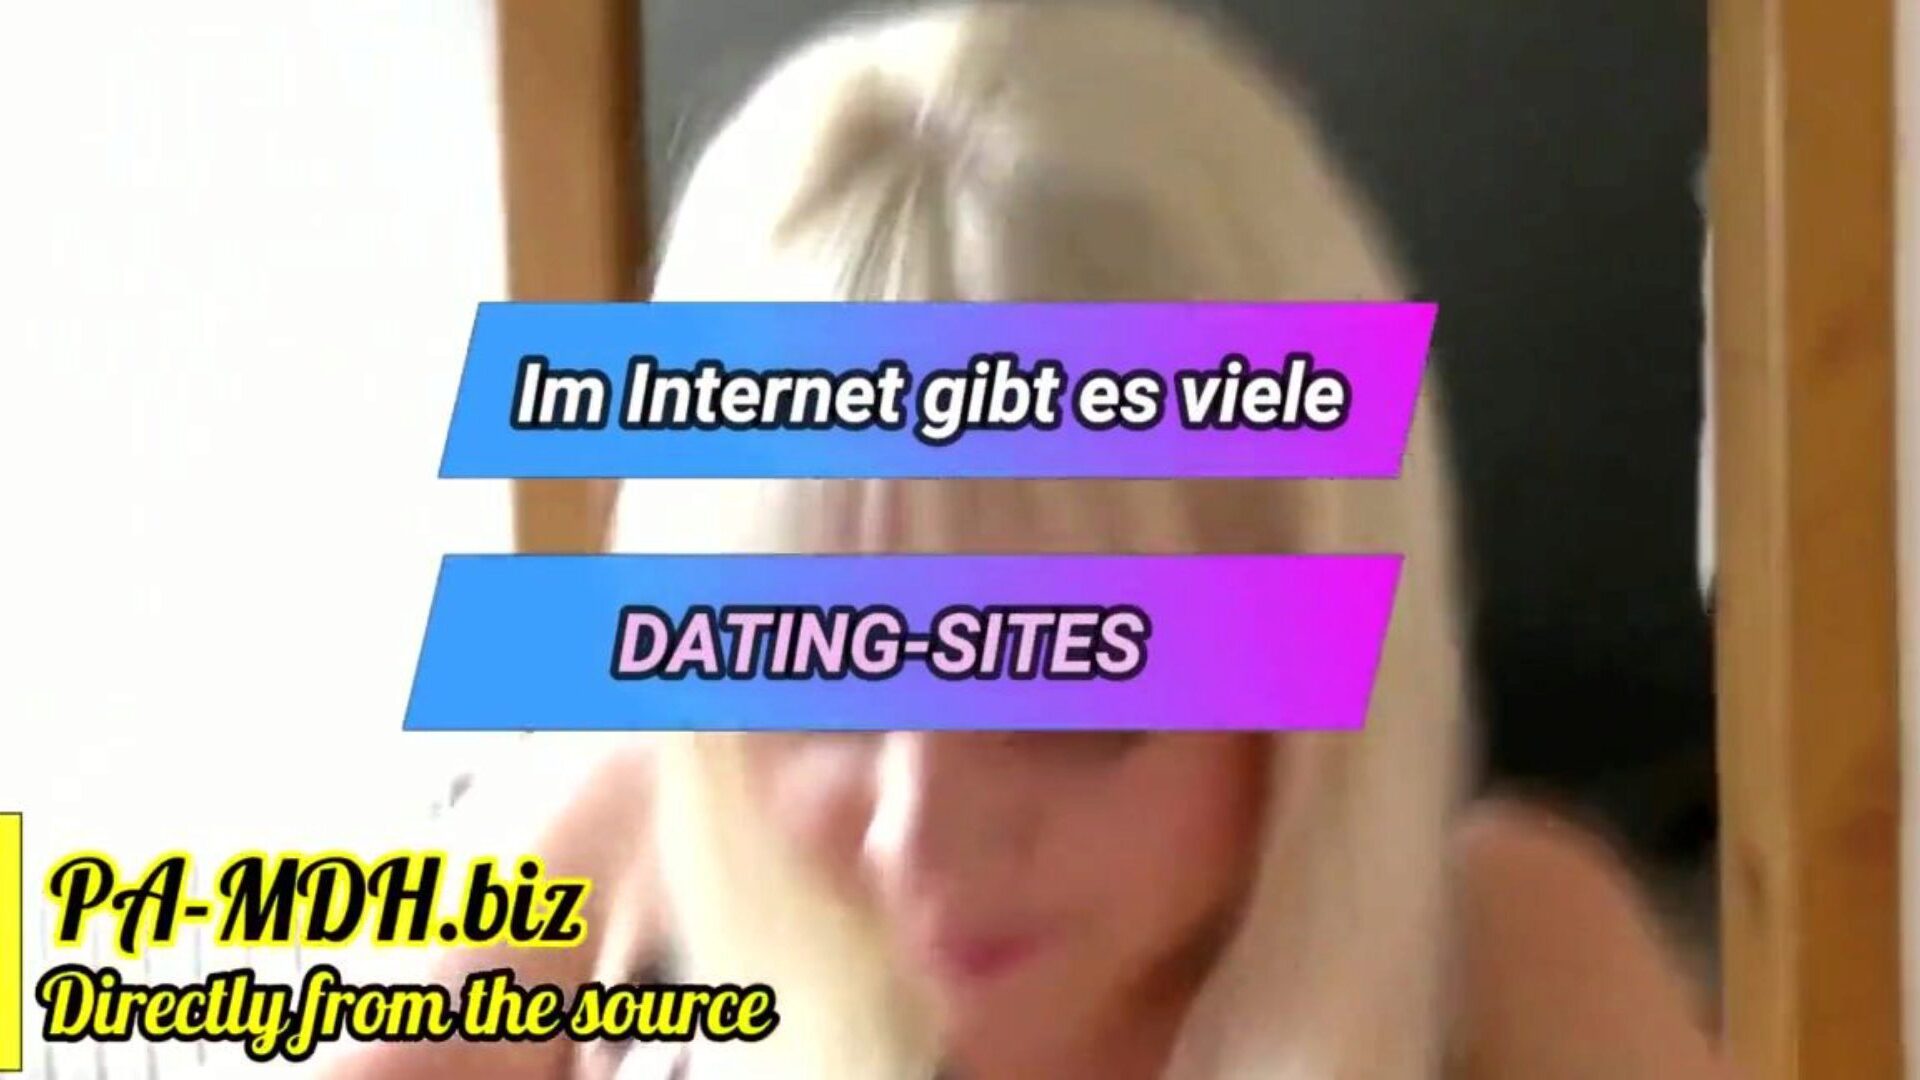 Stiefbruder Fickt Meine Titten Und Fingert Mich: HD Porn 45 Watch Stiefbruder Fickt Meine Titten Und Fingert Mich video on xHamster - the ultimate archive of free-for-all German New Beeg Tube HD hard-core pornography tube videos